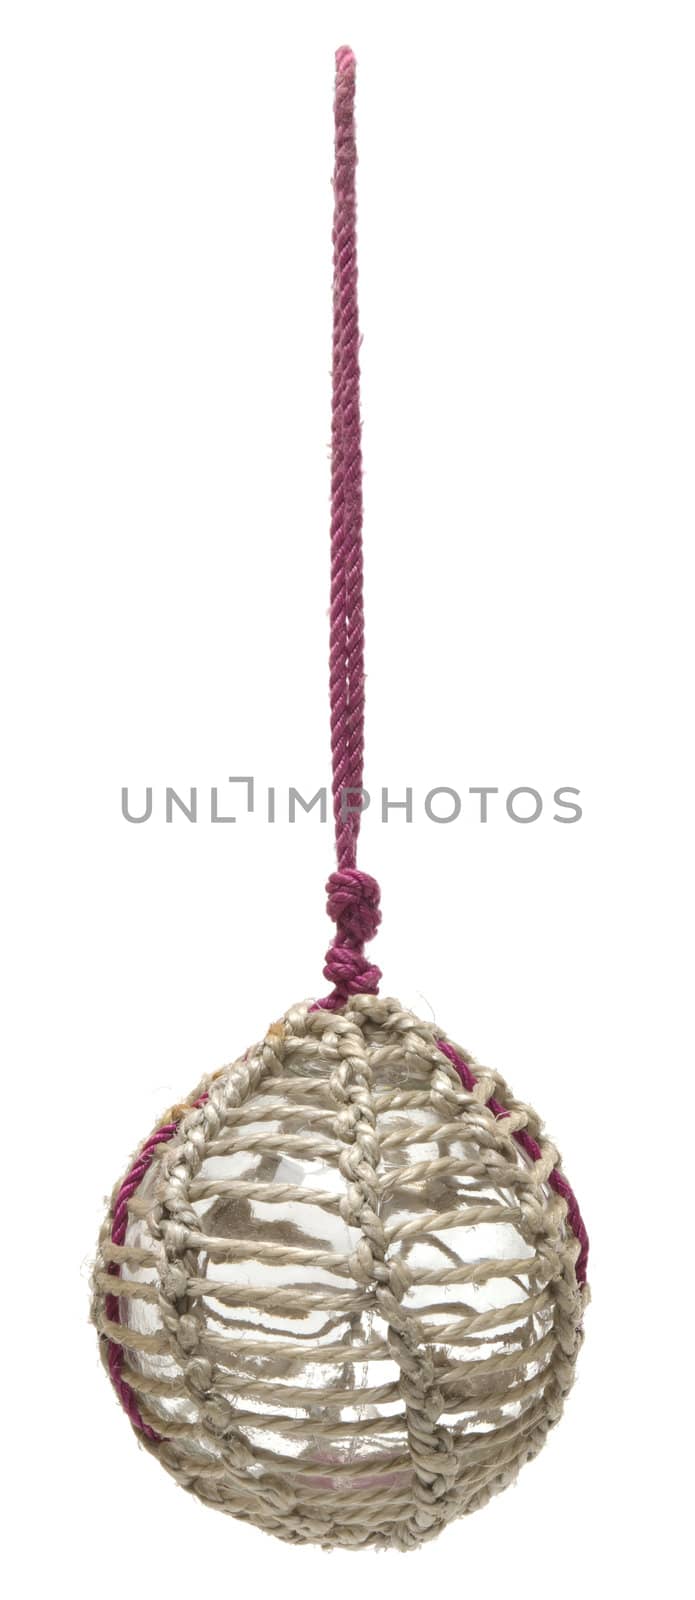 Glass fishing buoy used to keep fishing nets floating. This is an old glass antique. Isolated on white background.